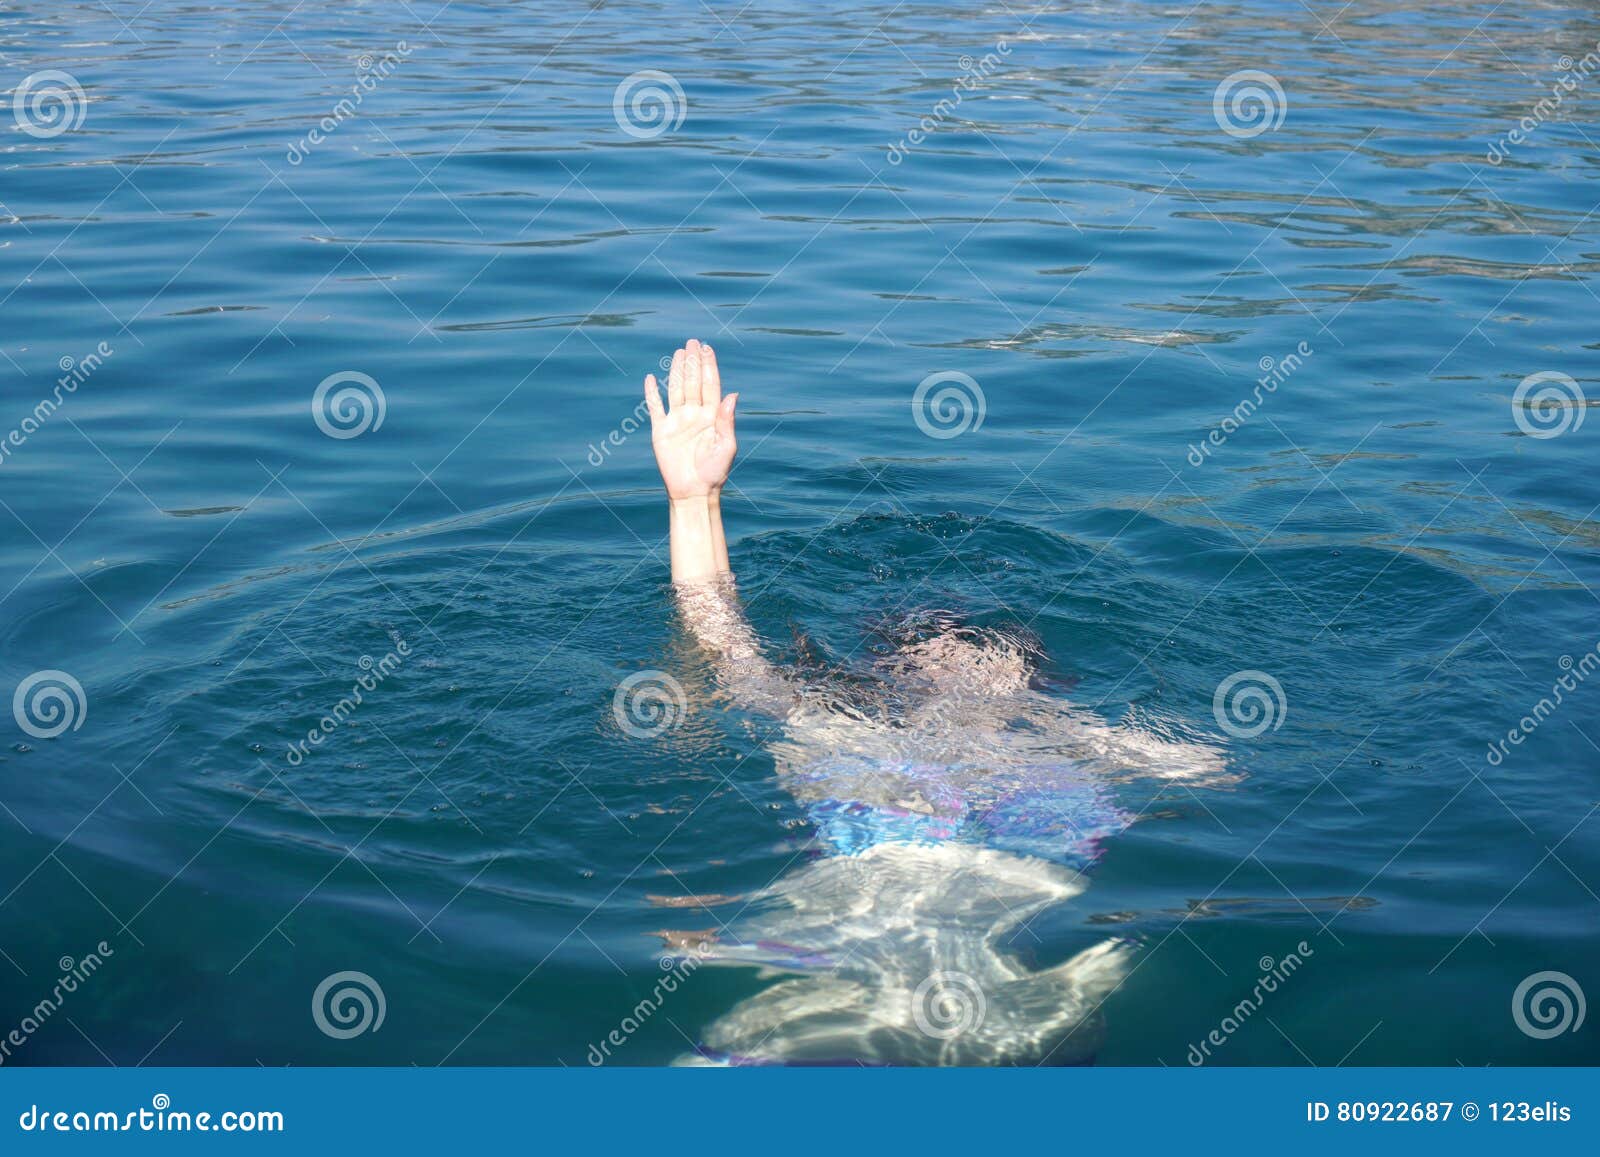 Drowning Woman stock image. Image of background, sink - 80922687